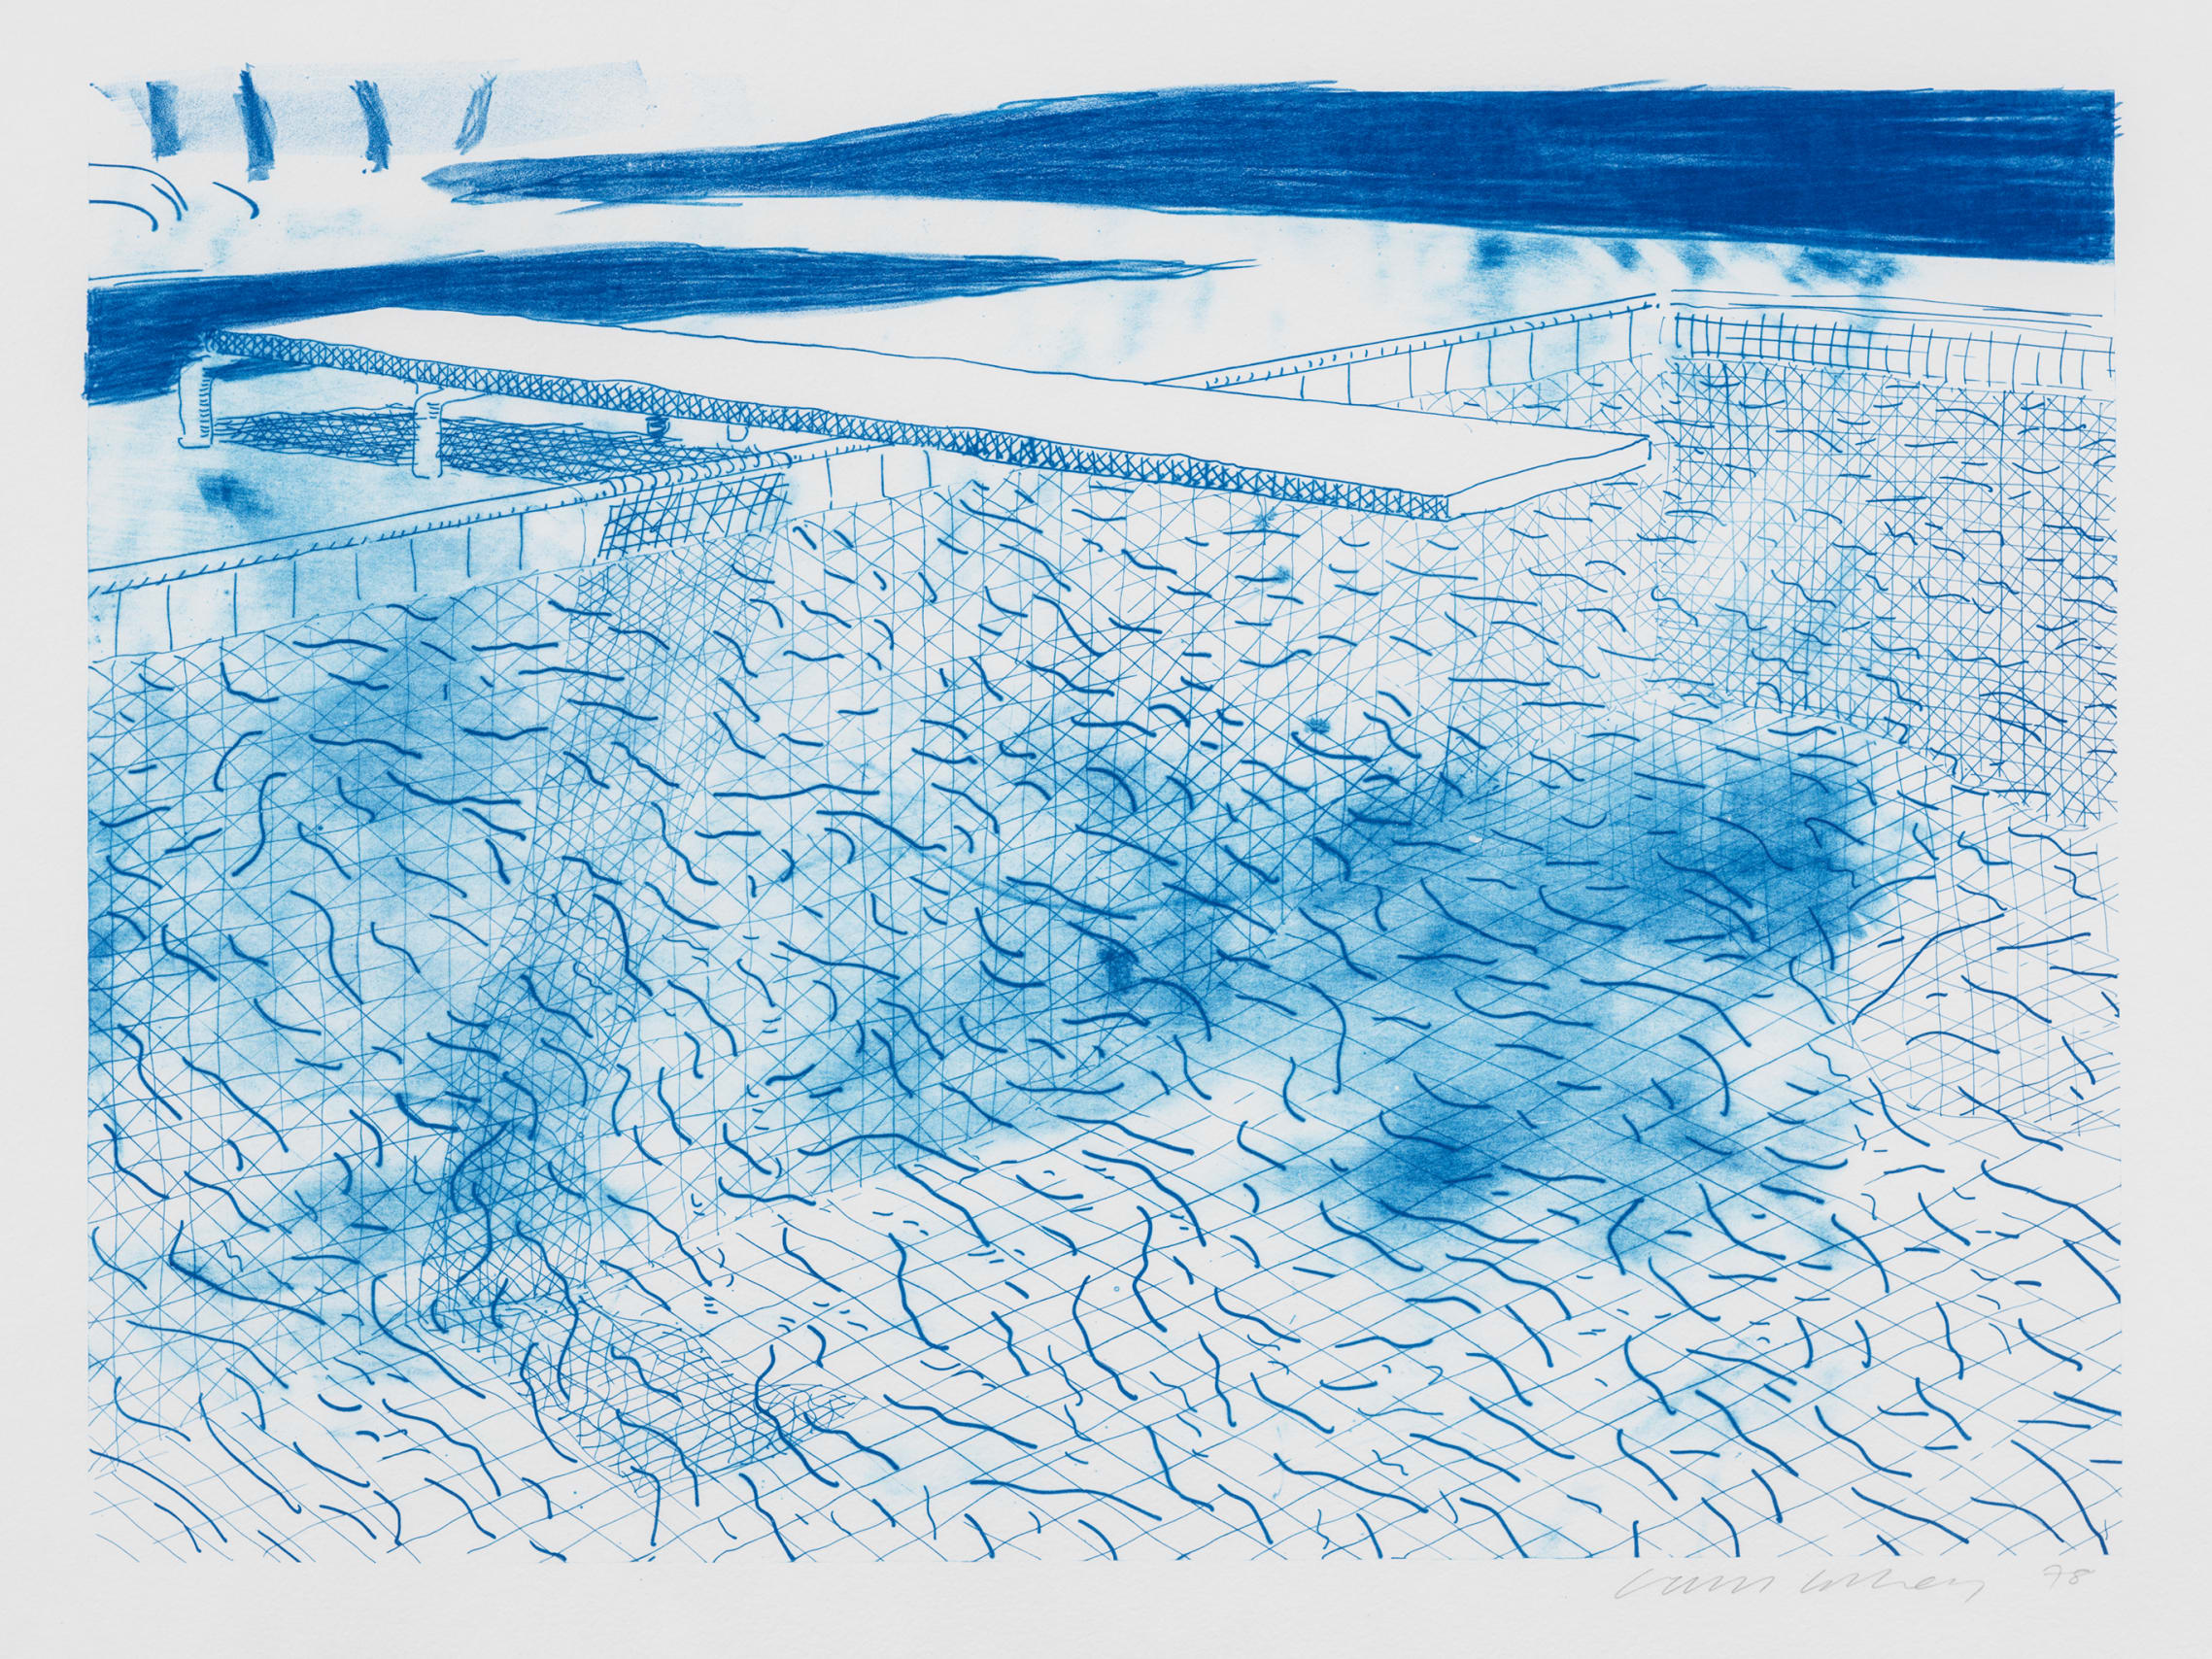 Lithograph of Water Made of Lines